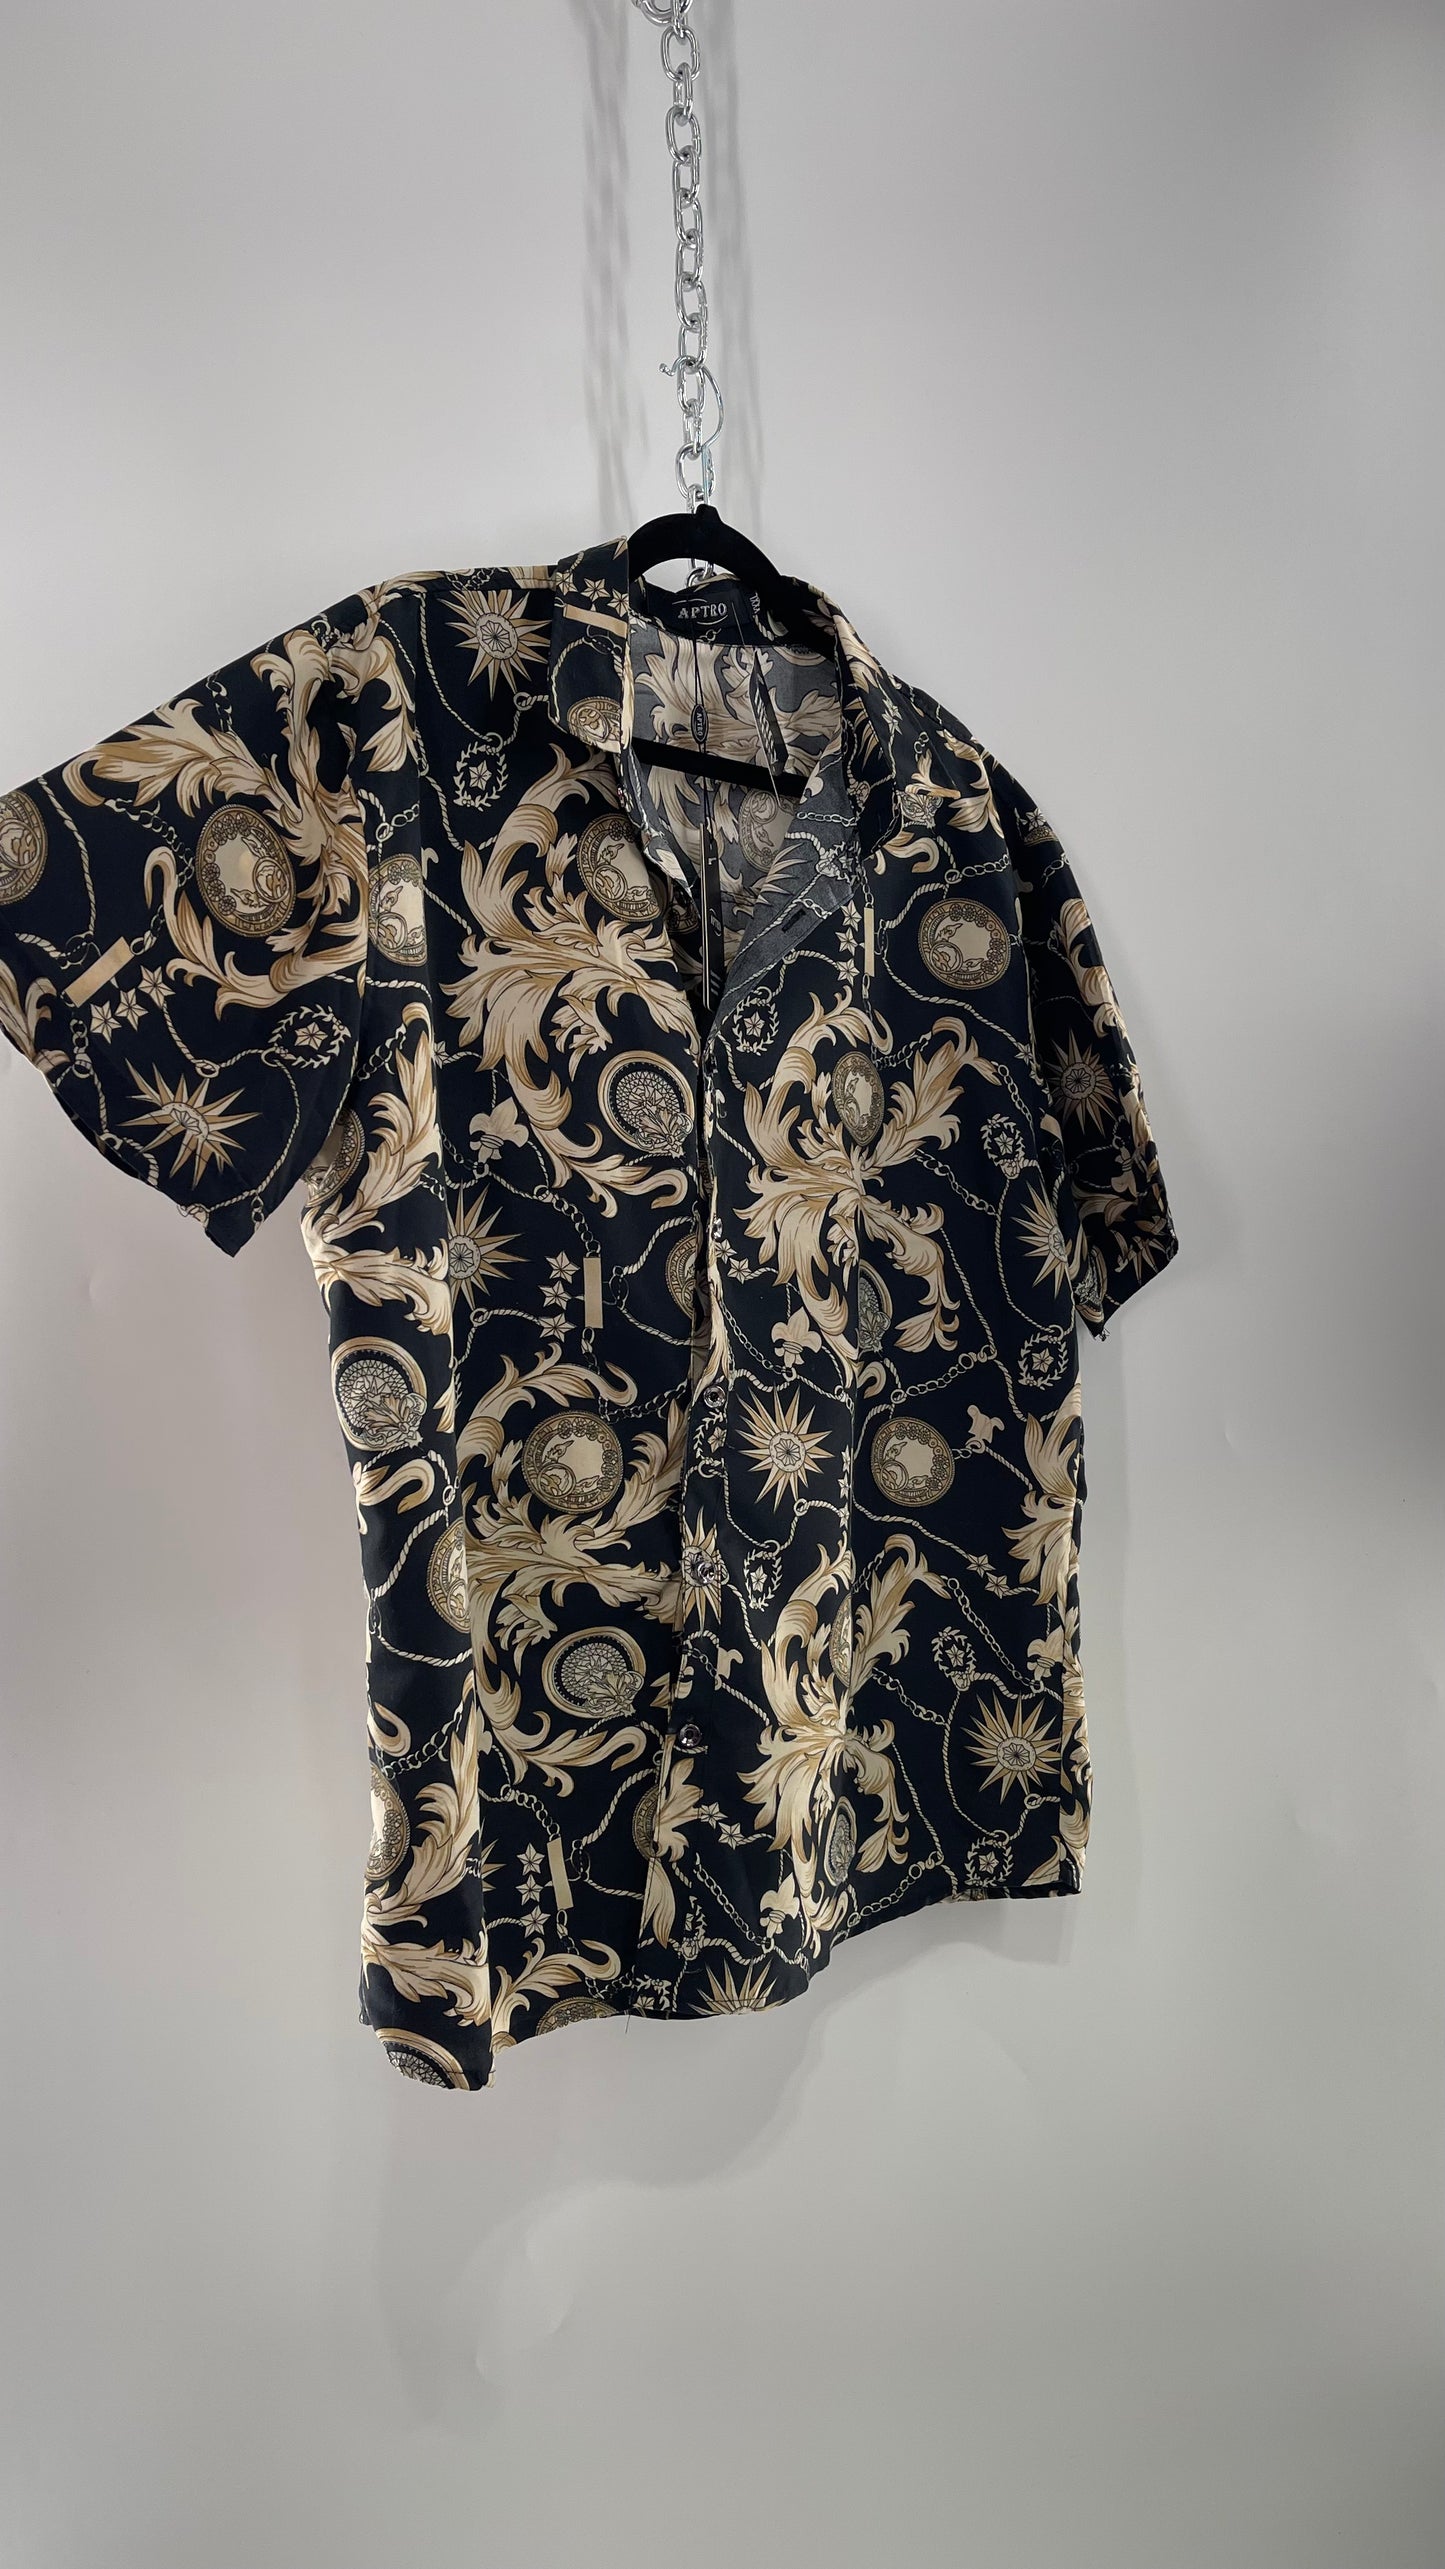 APTRO Black and Gold Brocade Short Sleeve Button Up with Tags (XXXL)